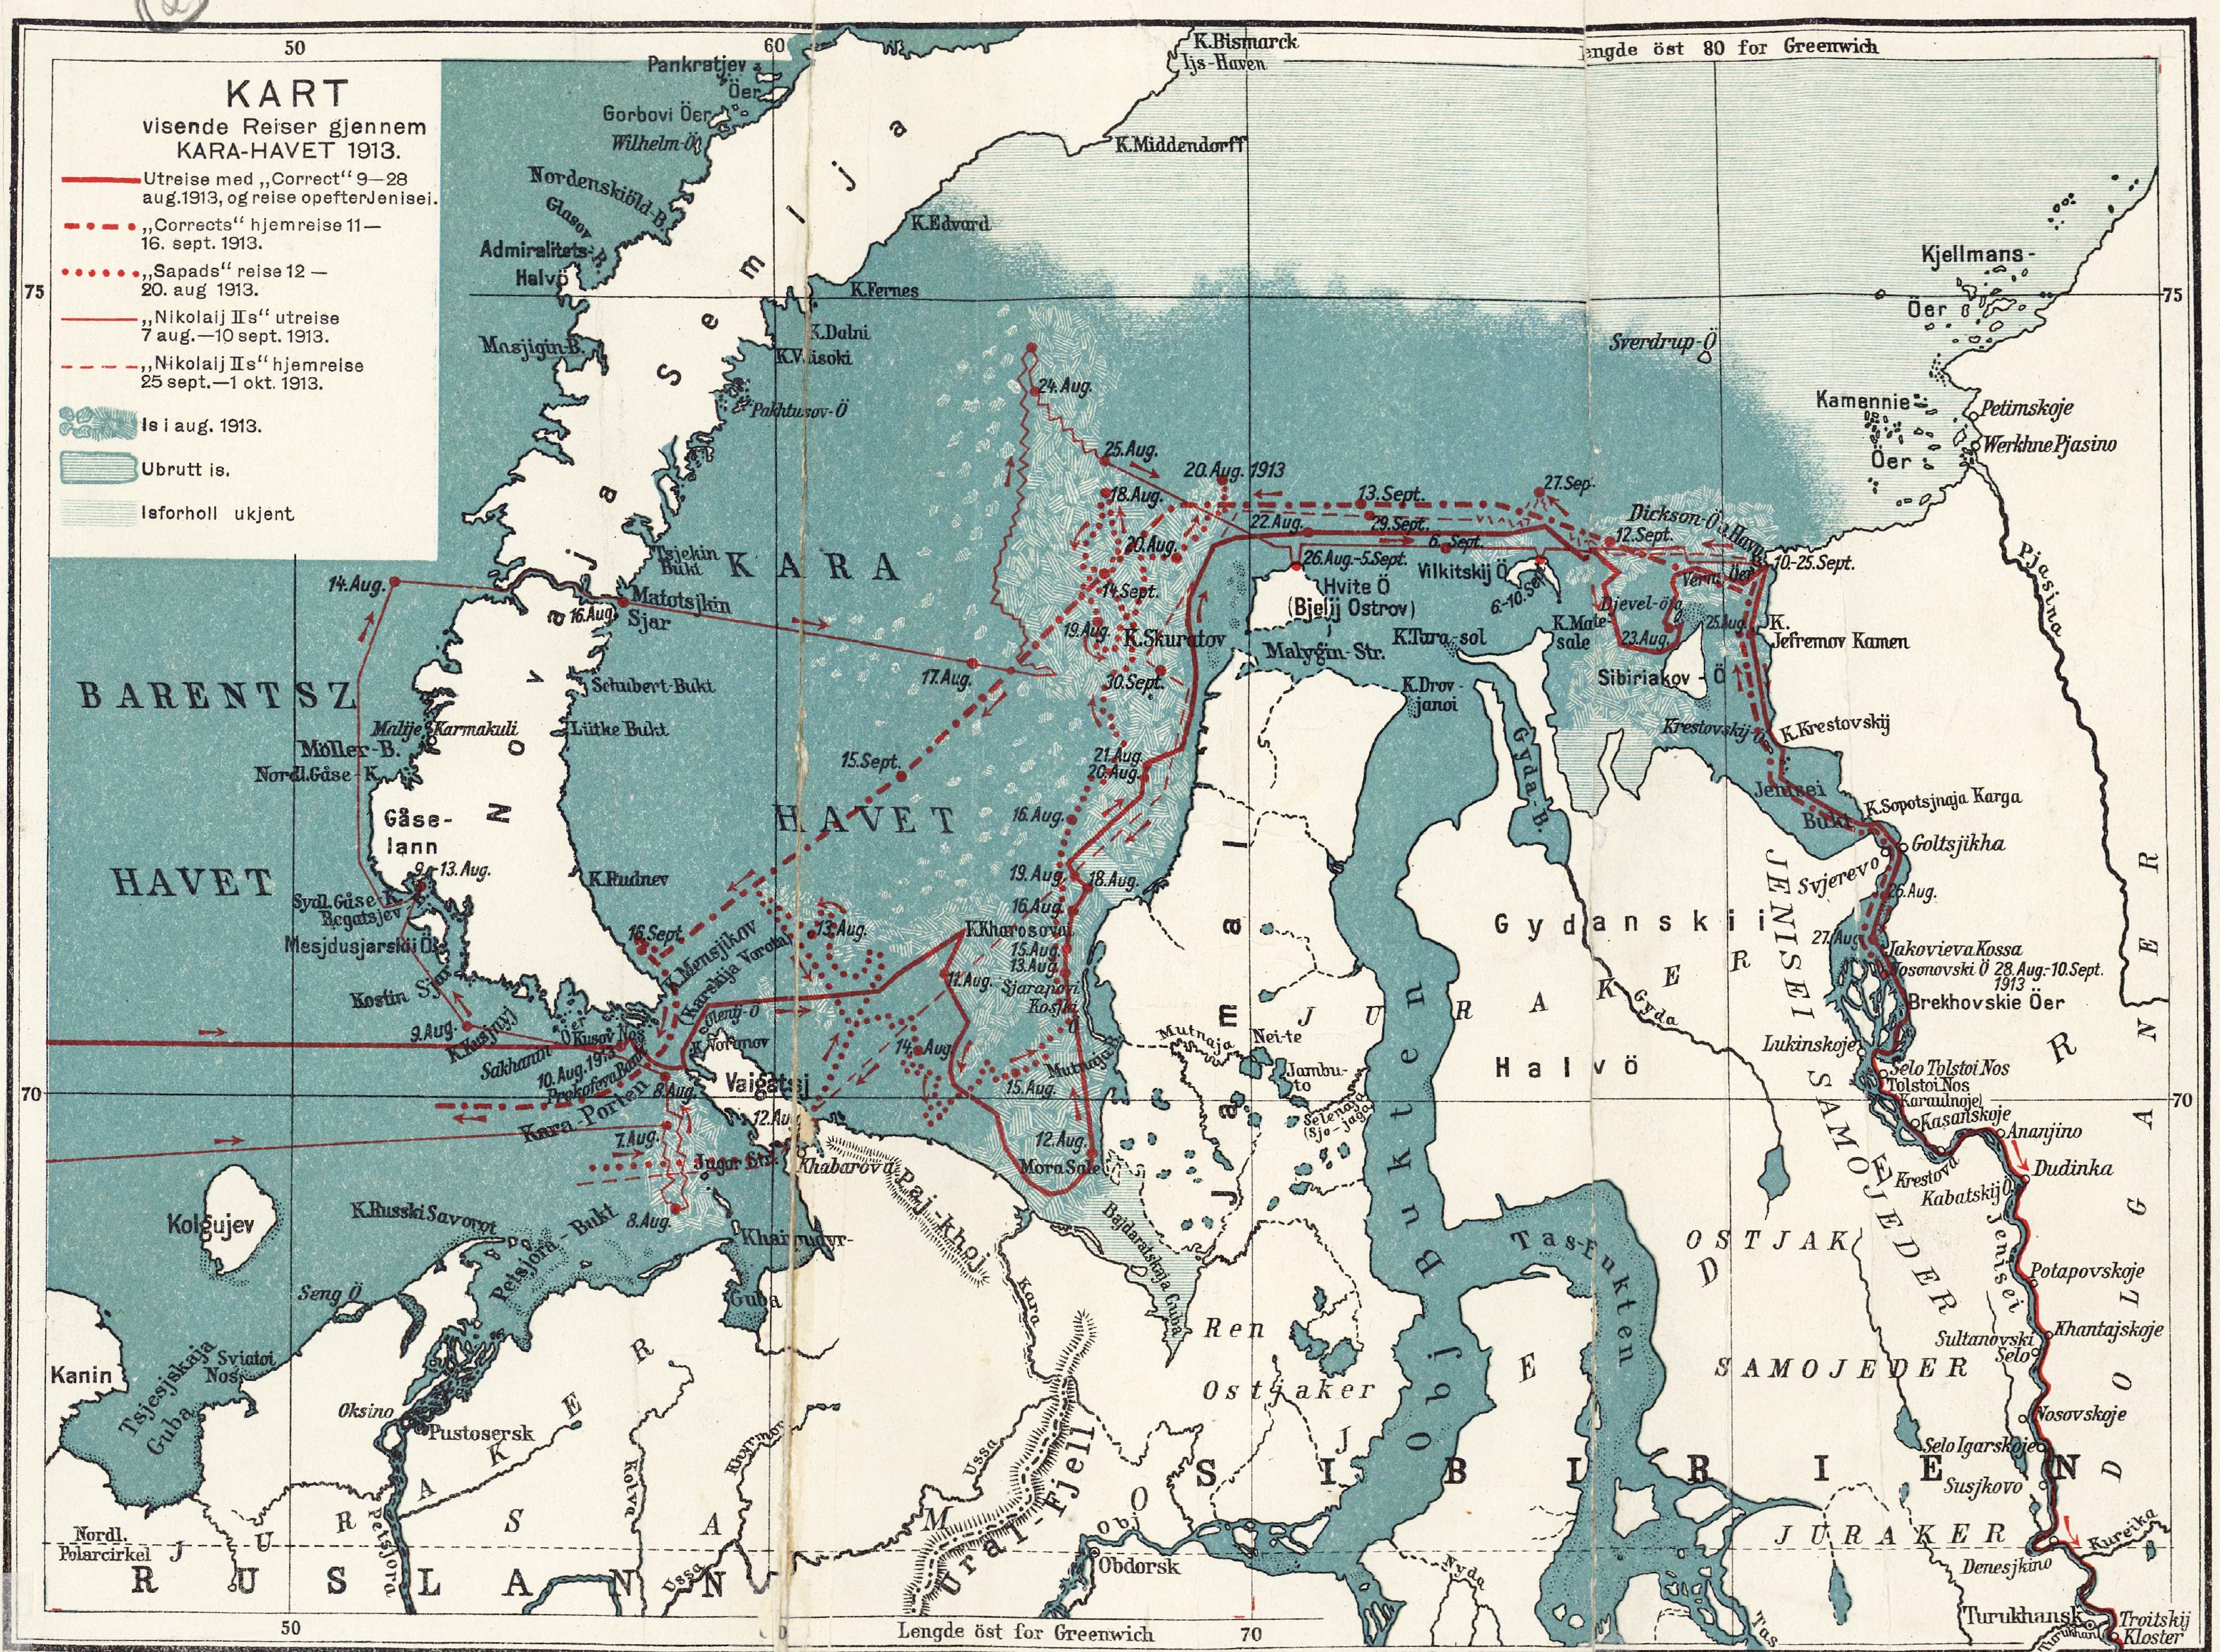 P509 Map of the Kara Sea and adjoining territories, showing the track of The Correct and the ice conditions